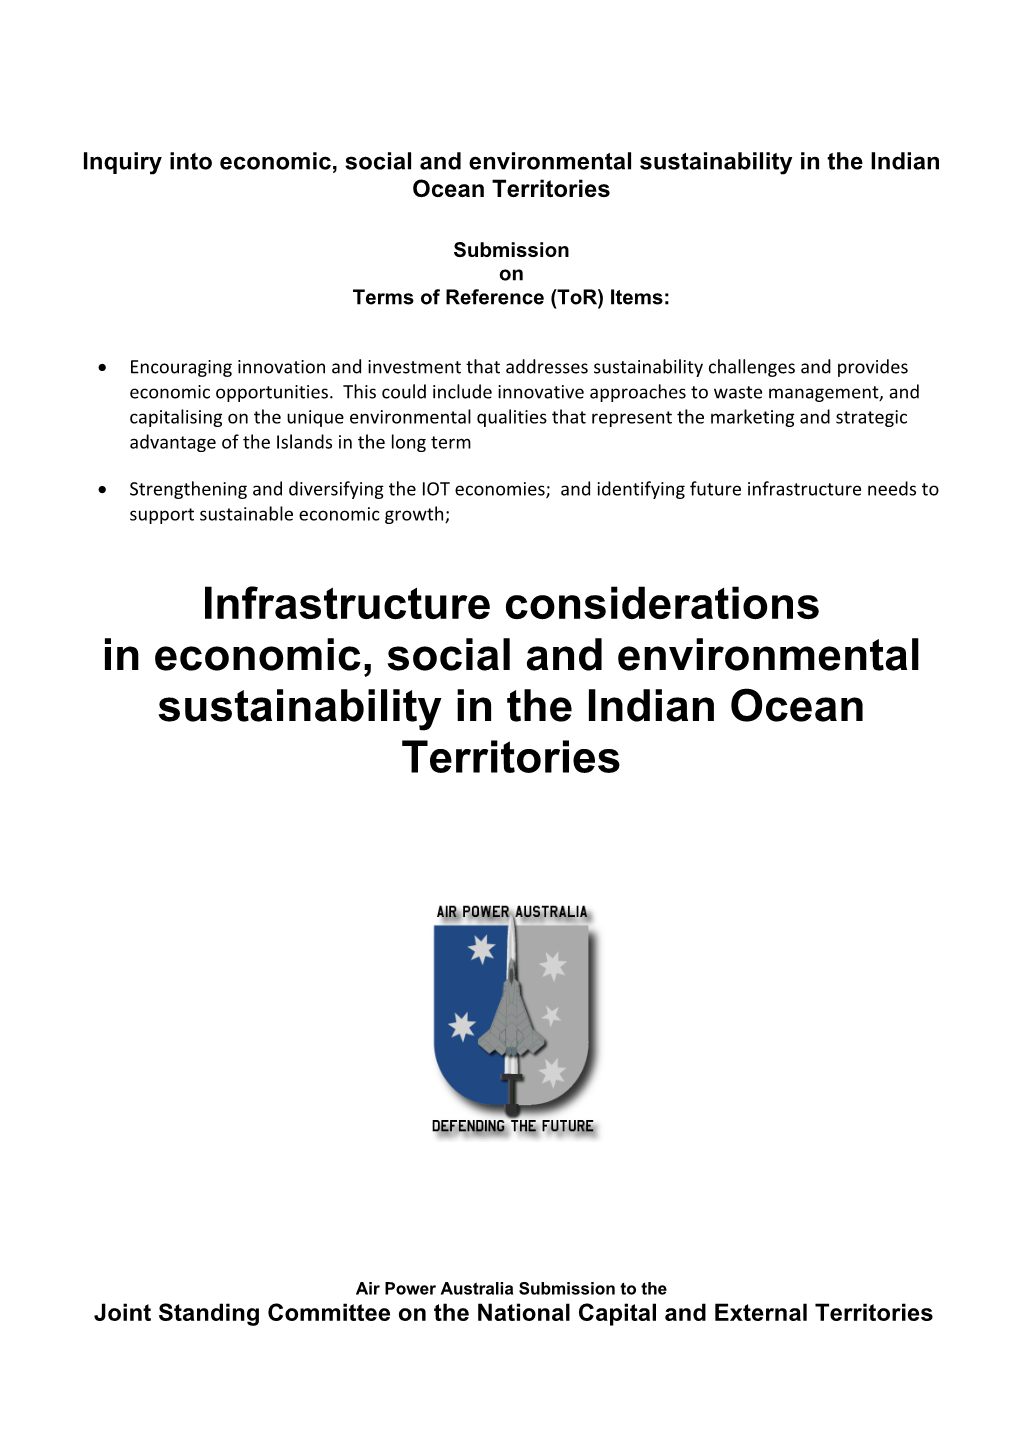 Infrastructure Considerations in Economic, Social and Environmental Sustainability in the Indian Ocean Territories